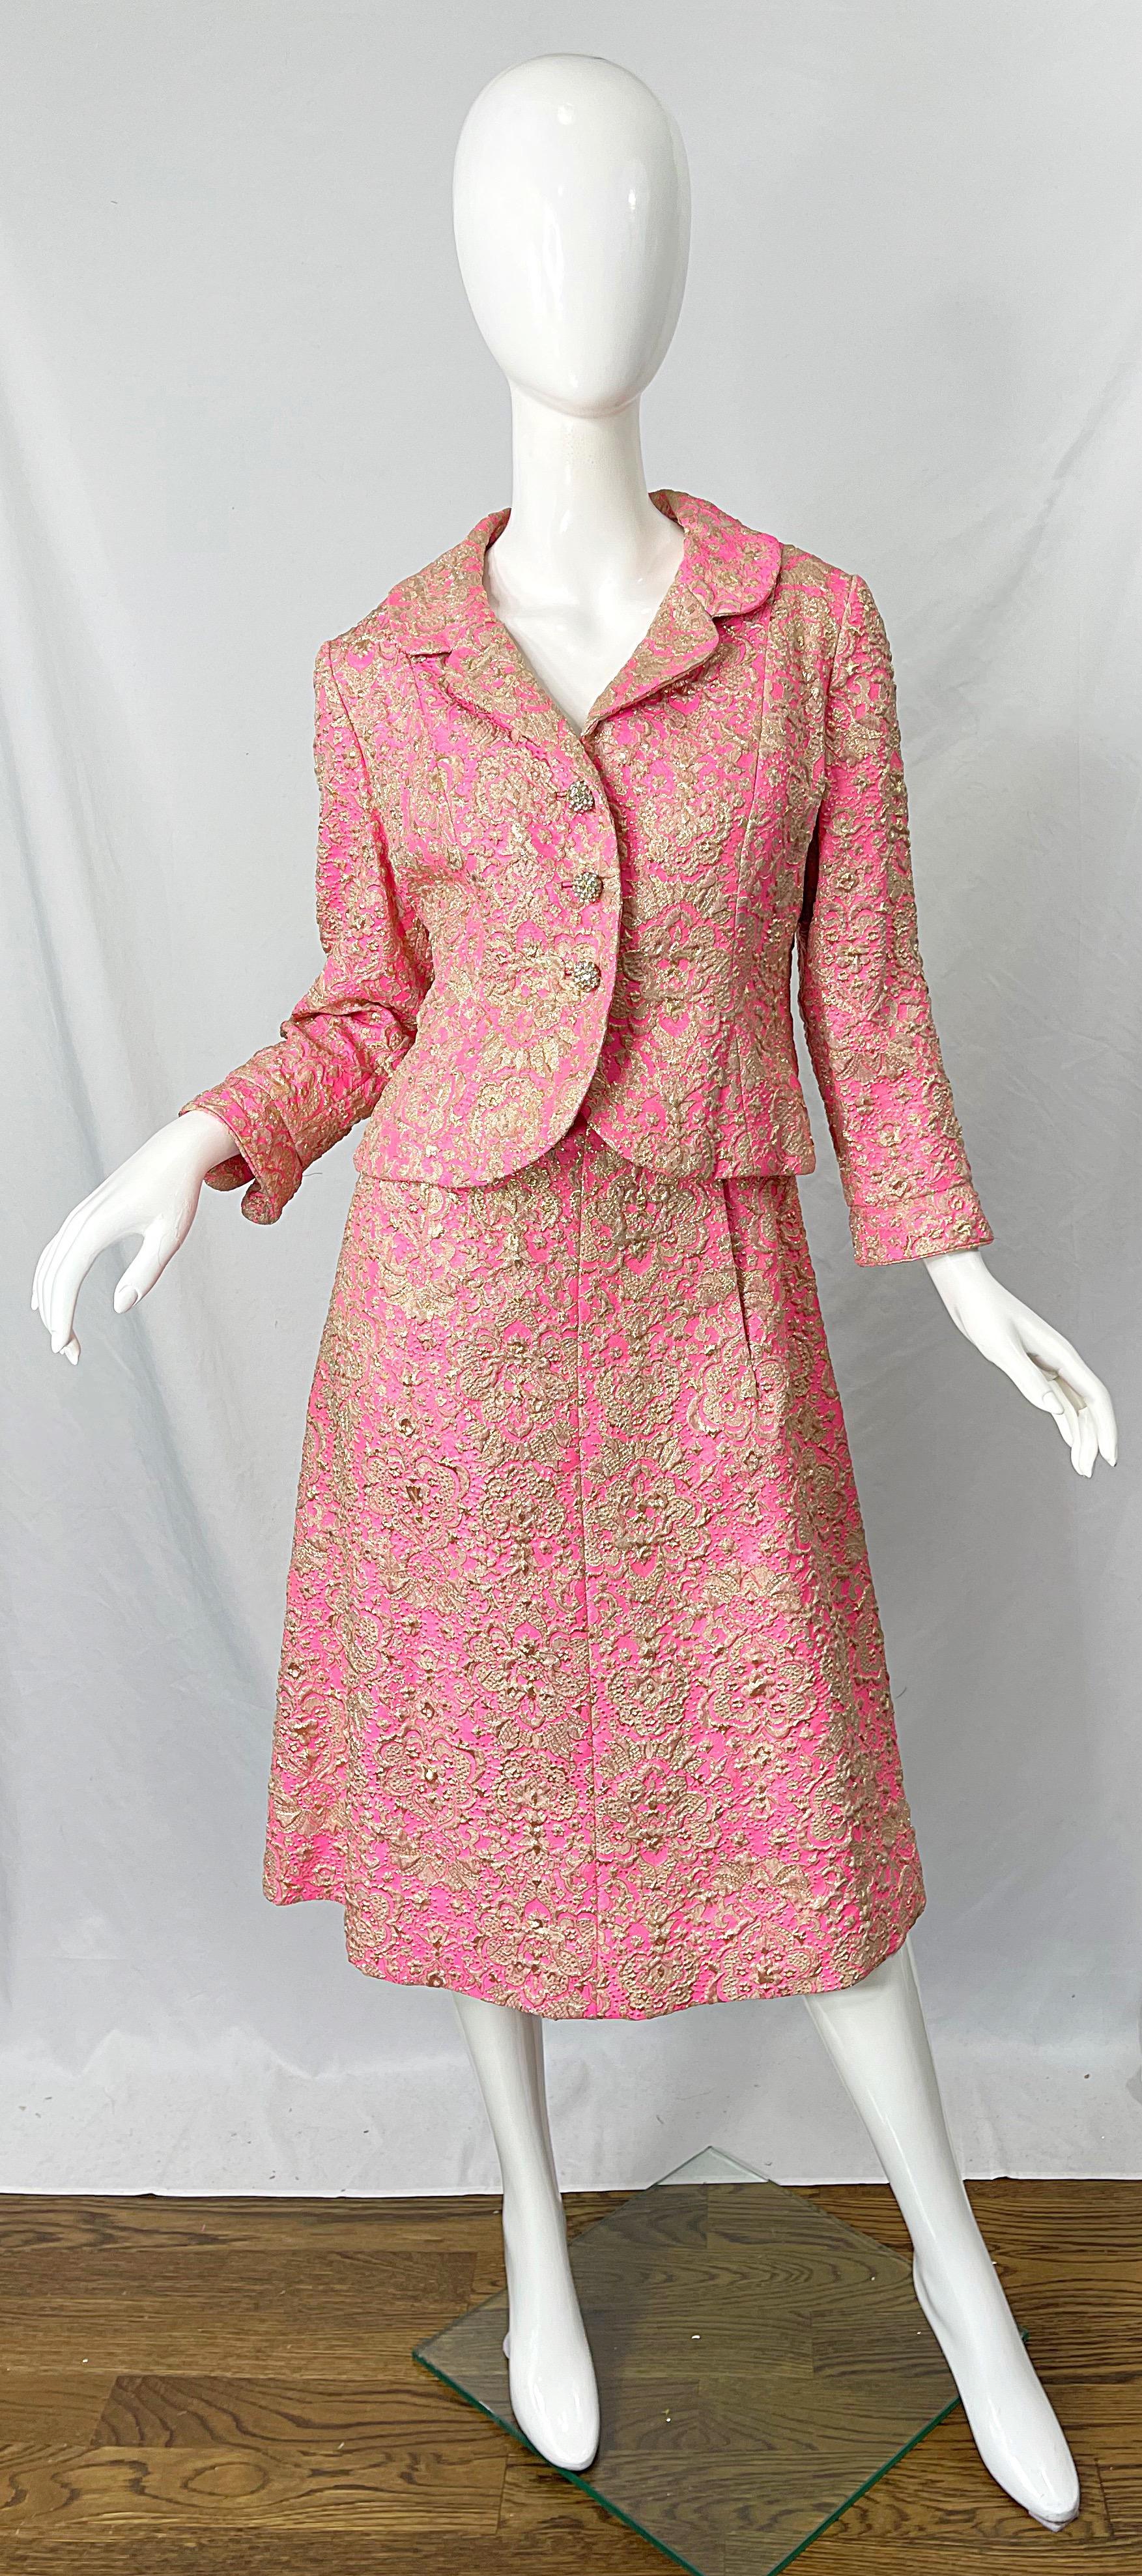 Chic 60s SAKS 5th AVE pink and gold silk brocade sleeveless Jackie O A-Line Dress with matching cropped jacket! Rhinestone encrusted buttons up the front center jacket. Dress features a tailored bodice with a full skirt. Hidden metal zipper up top